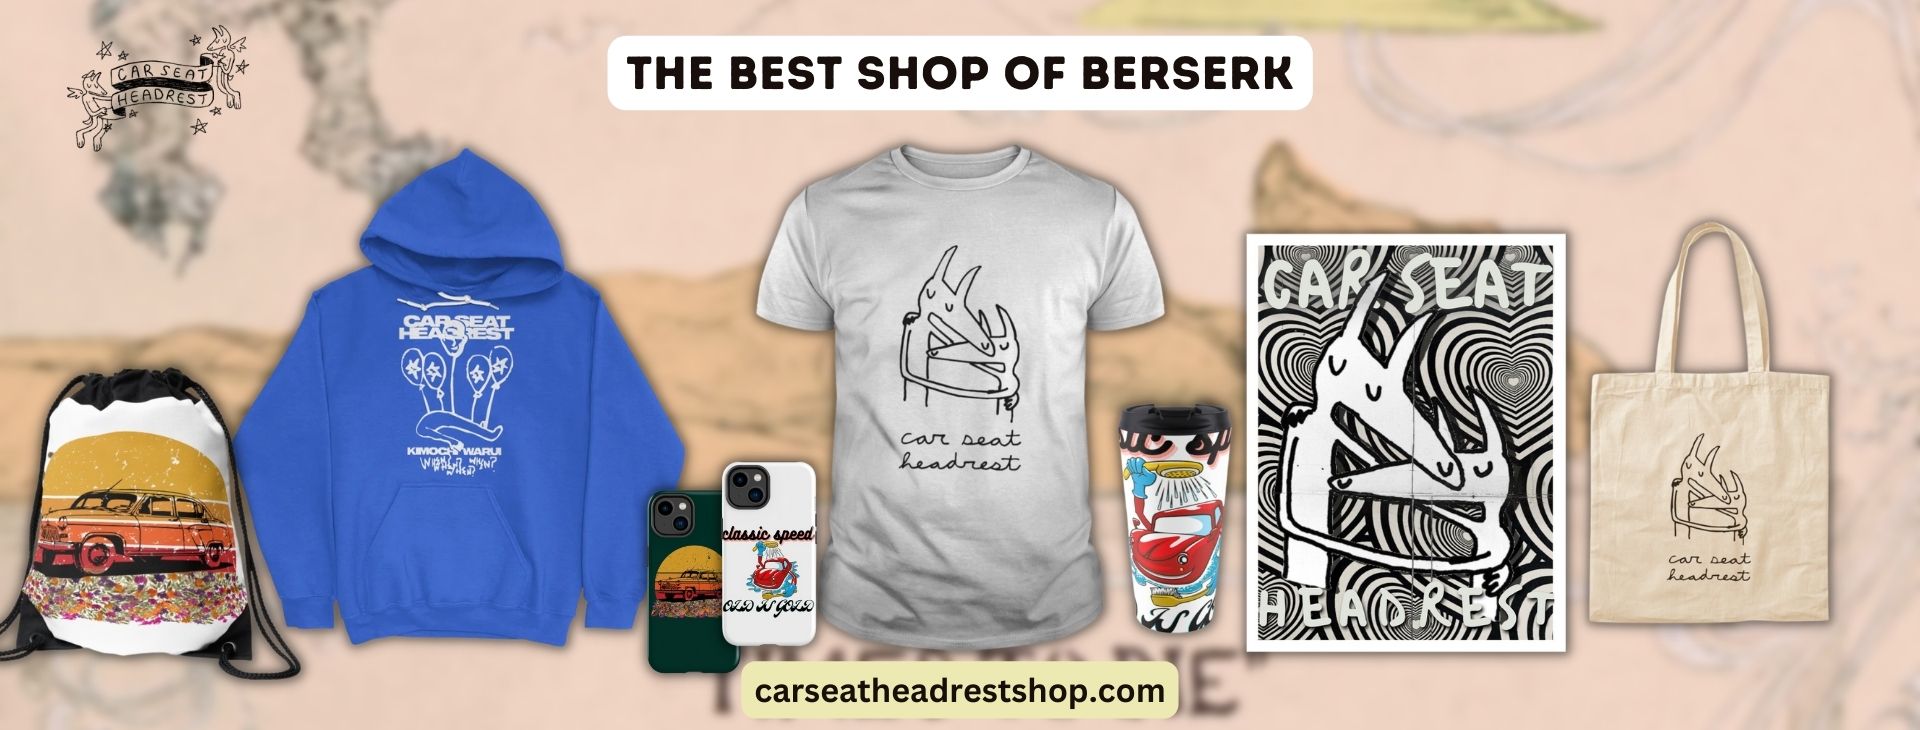 From T-Shirts to Totes: How to Wear Car Seat Headrest Merchandise with Flair